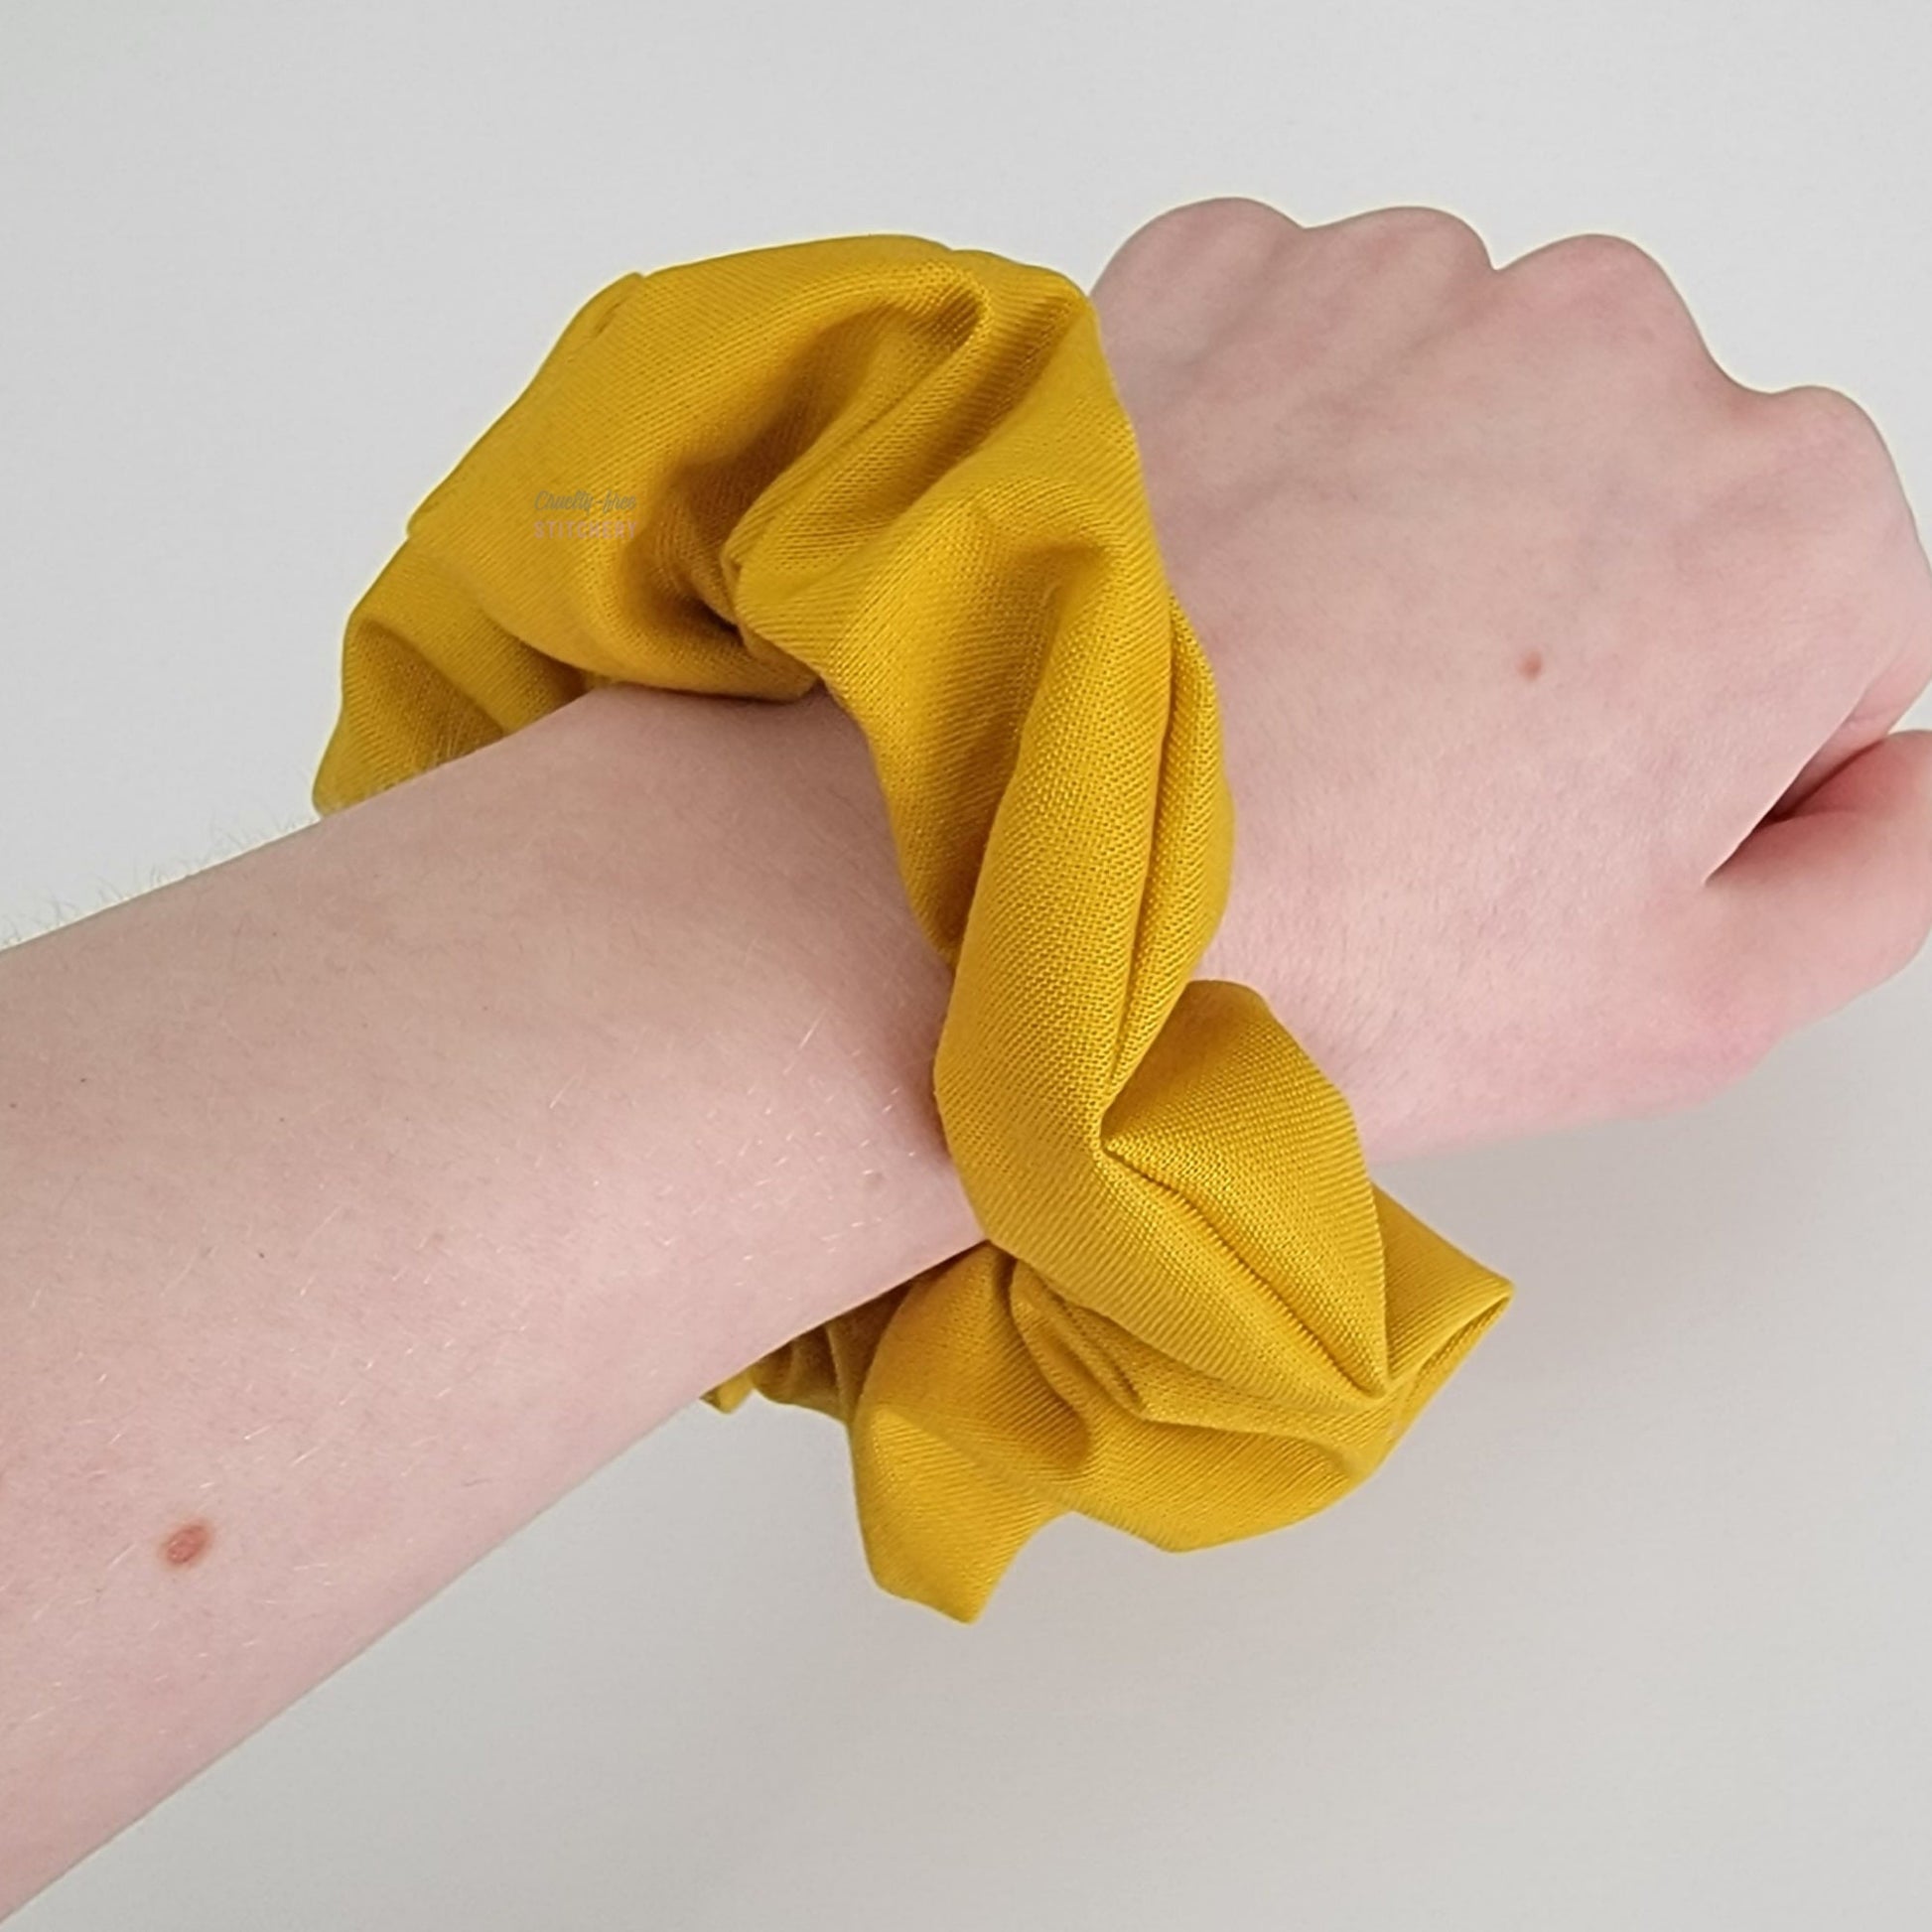 Solid mustard yellow scrunchie on my arm.